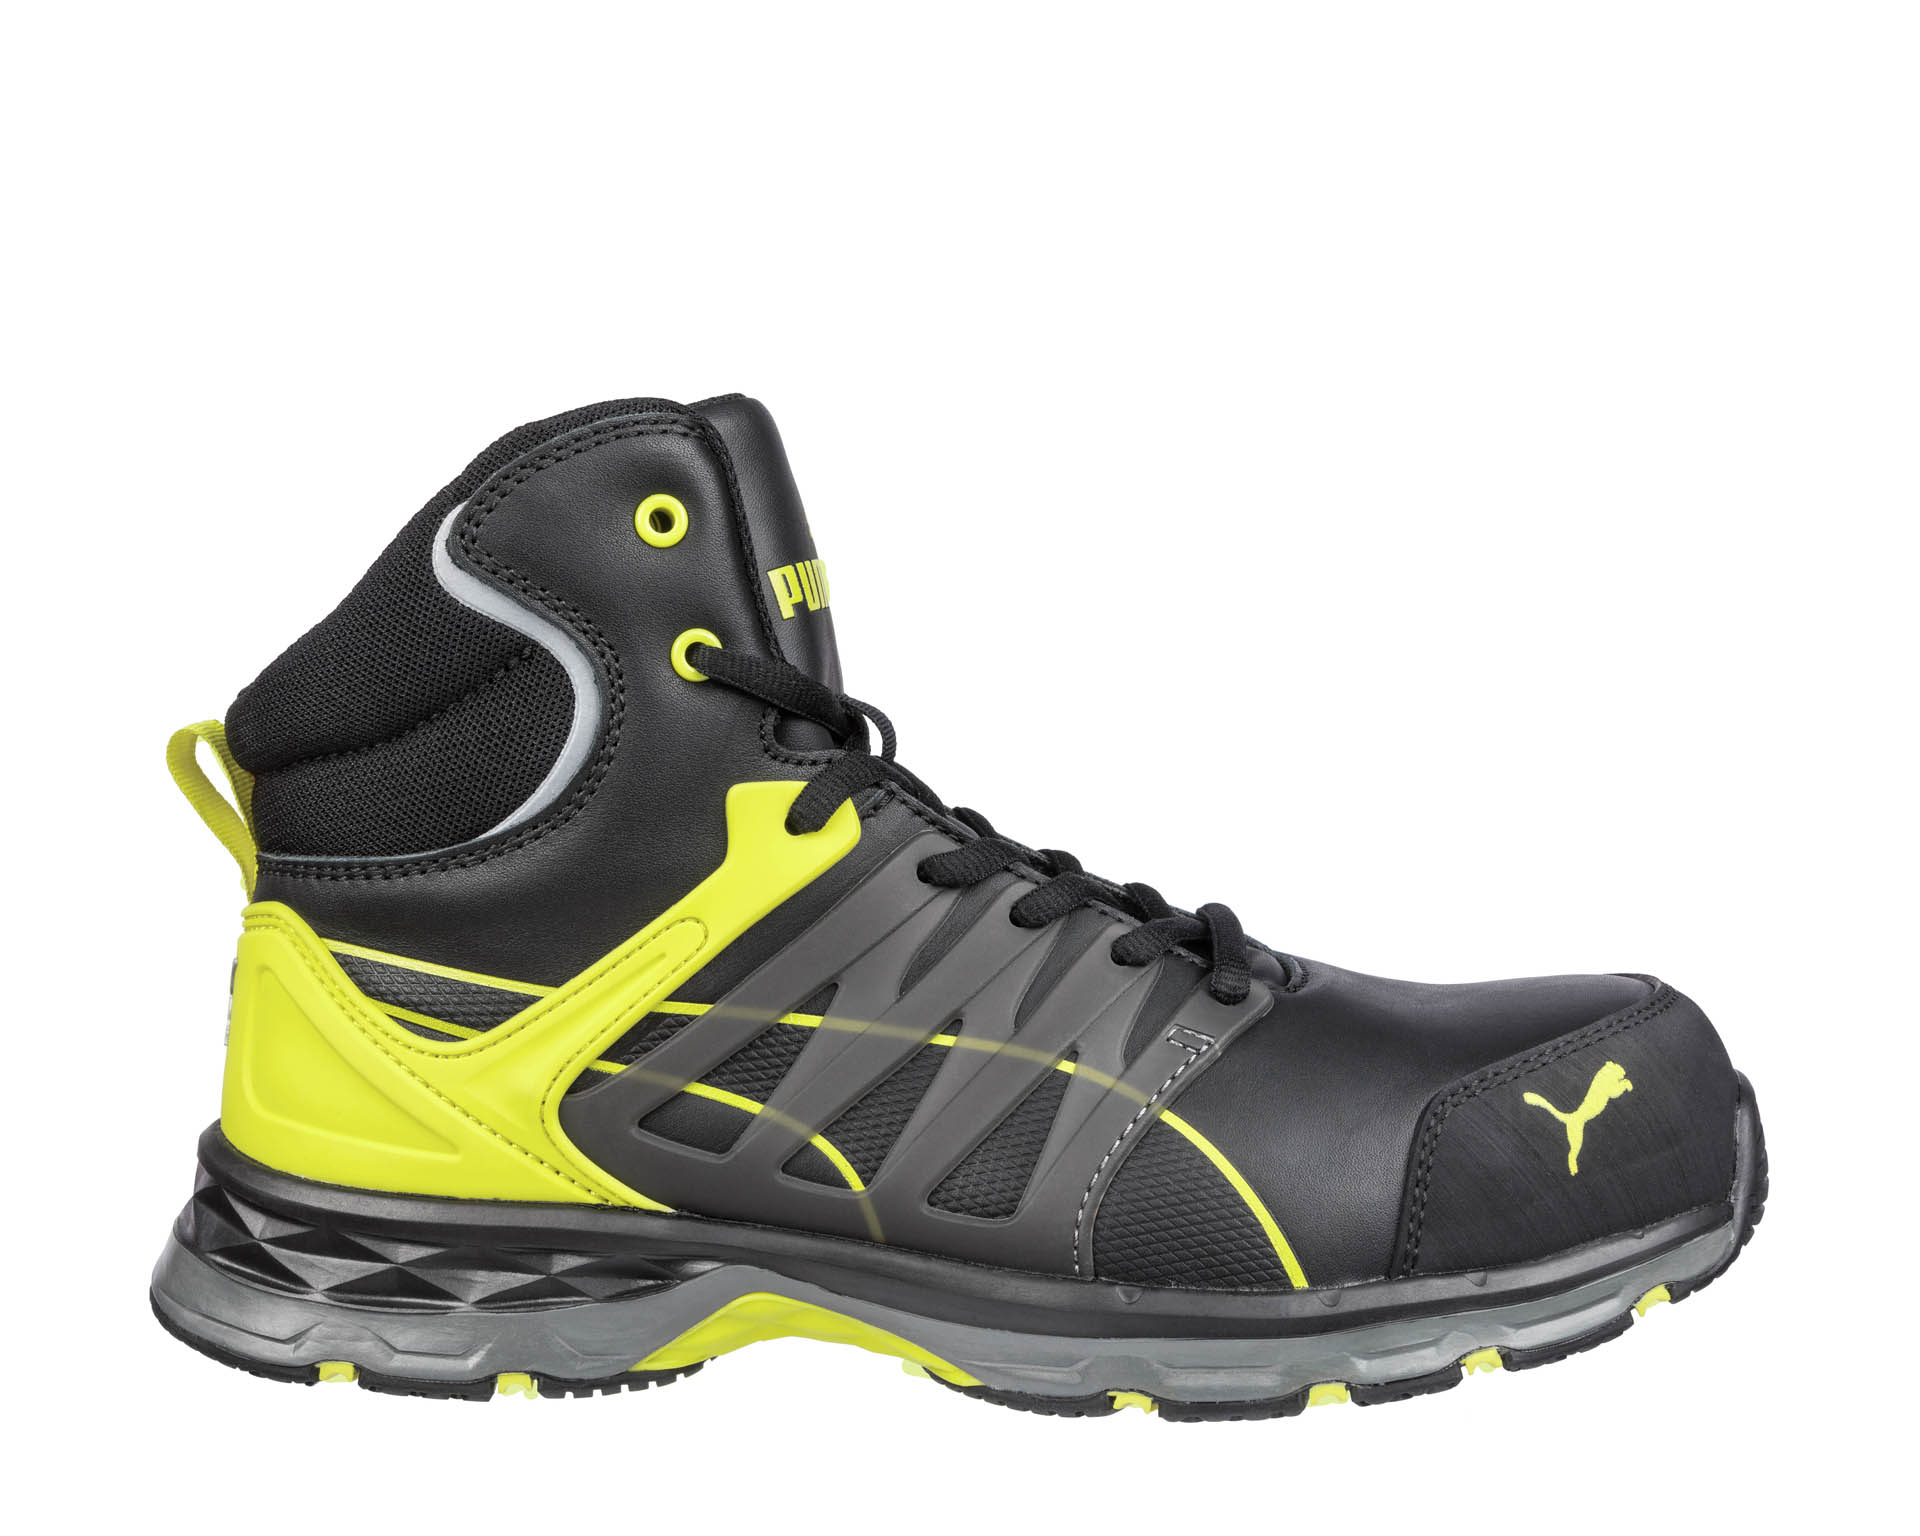 English PUMA HRO shoes ESD S3 SRC MID | Safety safety SAFETY 2.0 Puma YELLOW VELOCITY